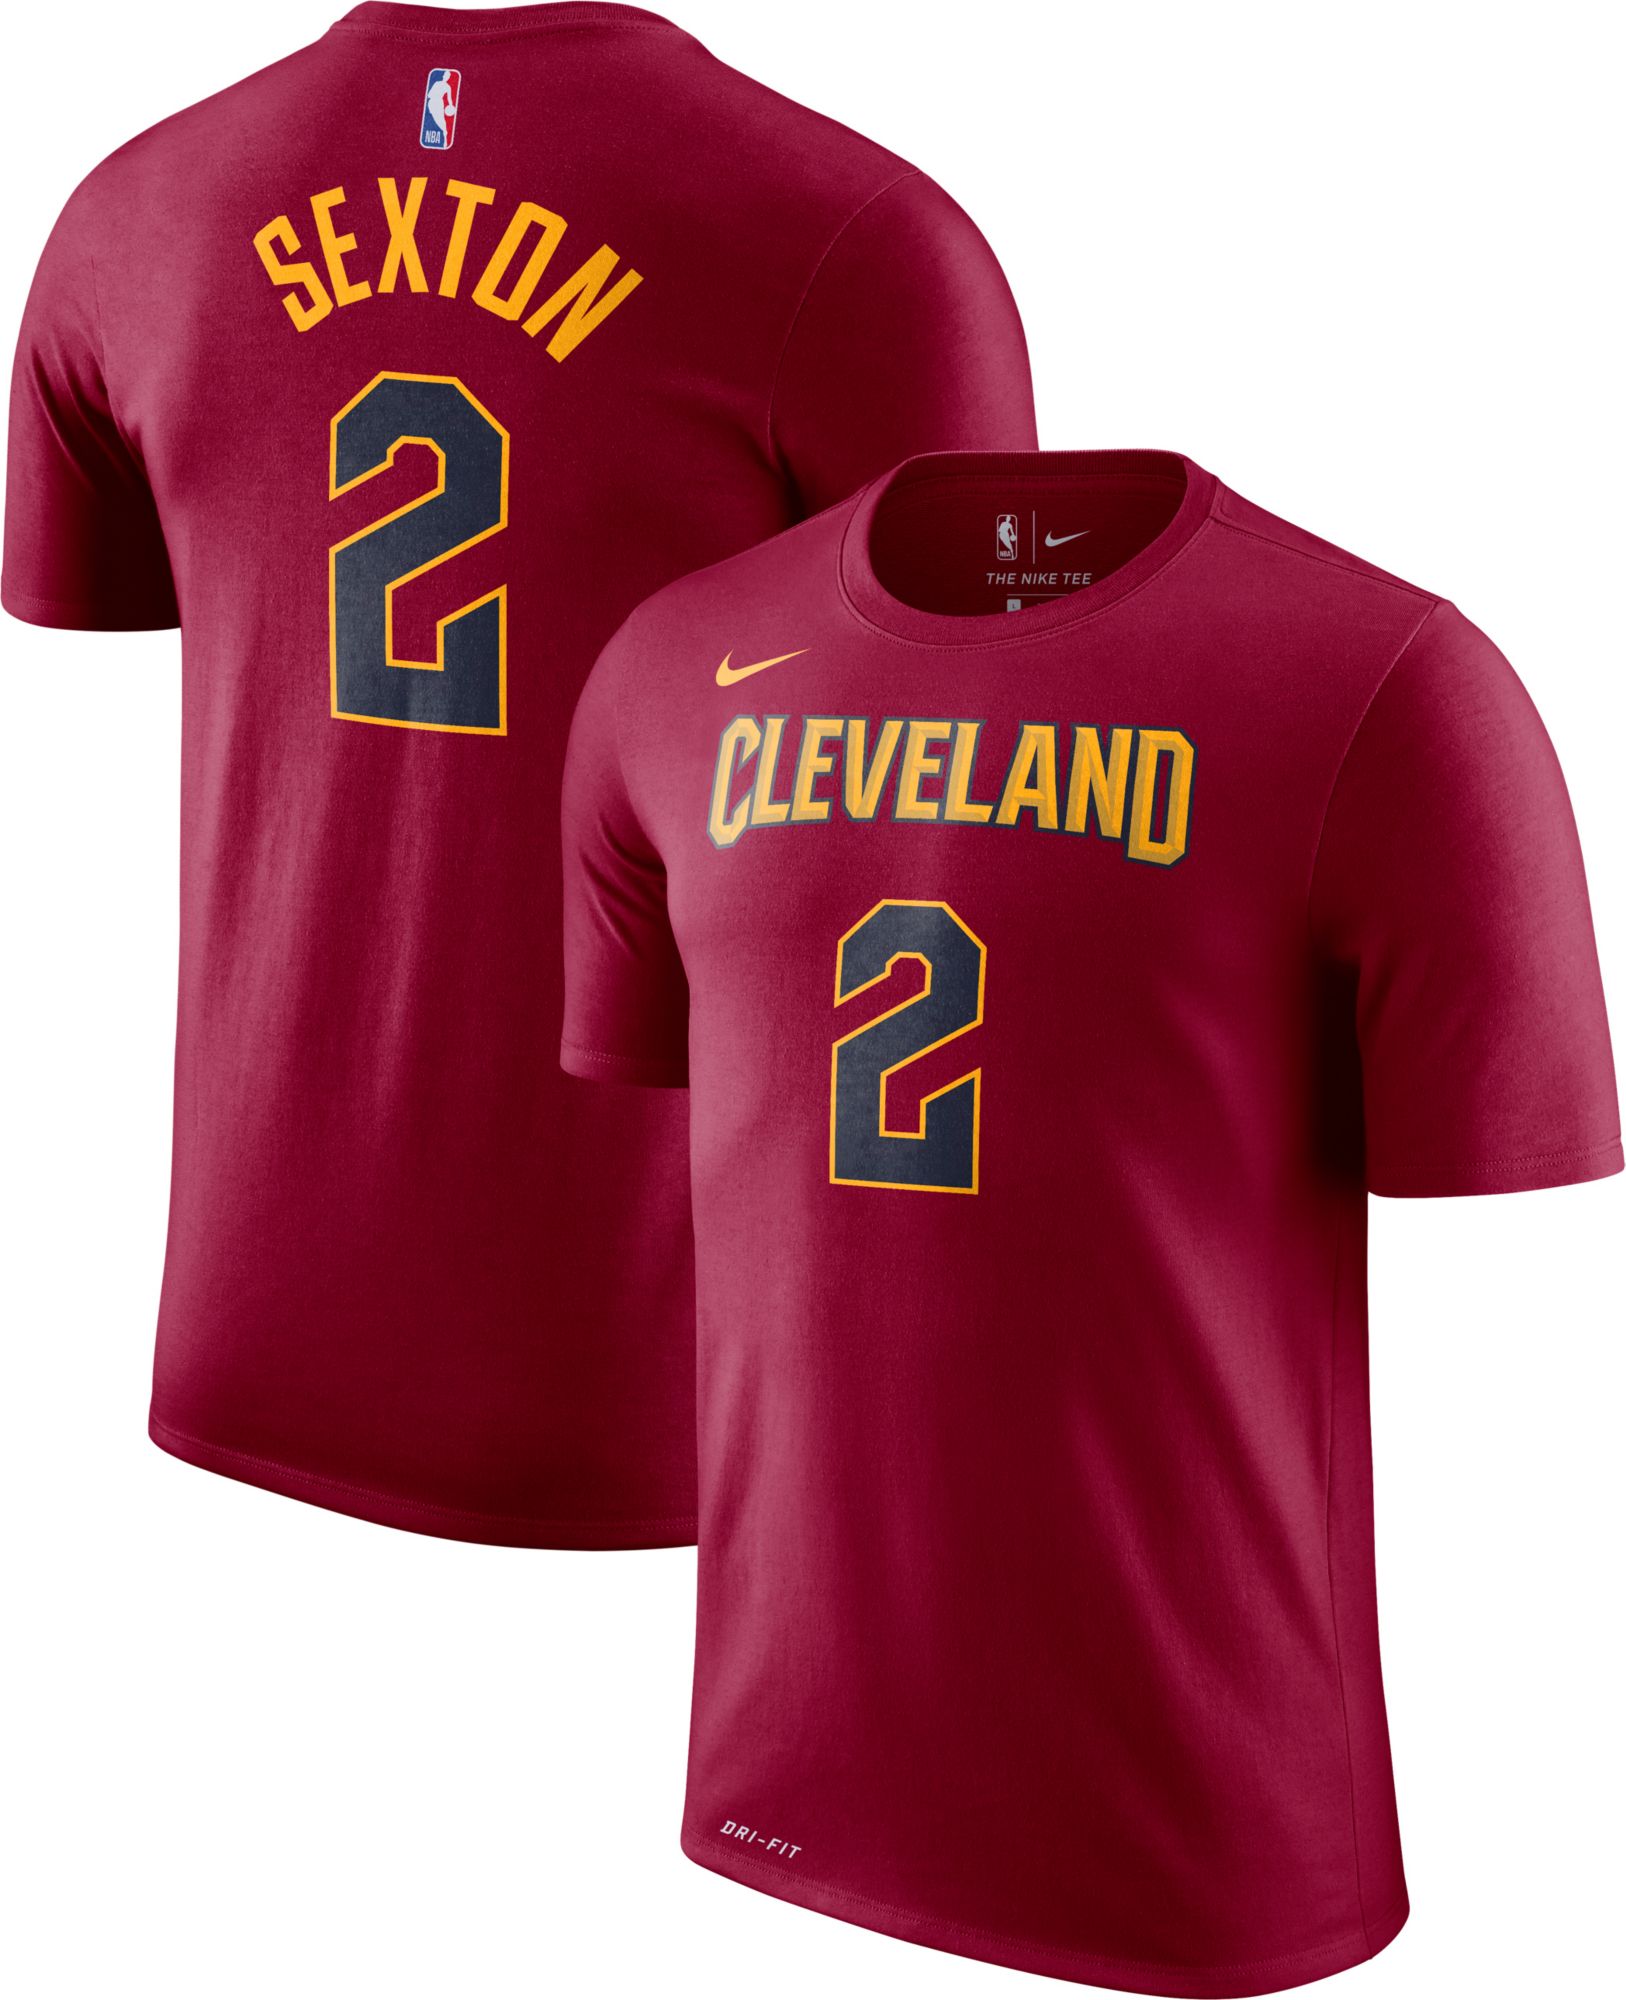 collin sexton youth jersey